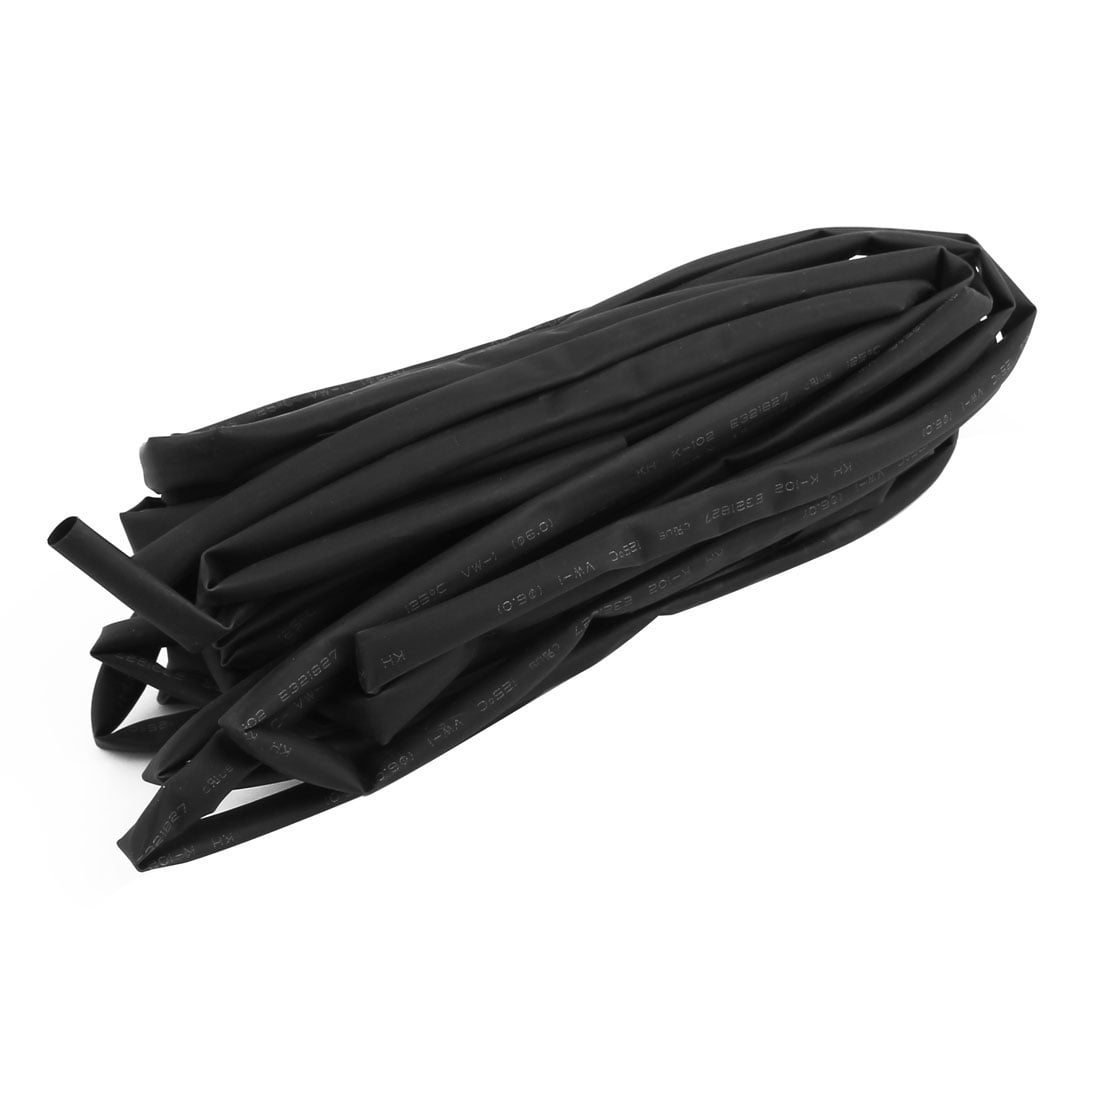 Heat Shrink Tubing Black for Wire Cable Sleeving 20 mm 1 Roll 100 Ft Heat Shrink 